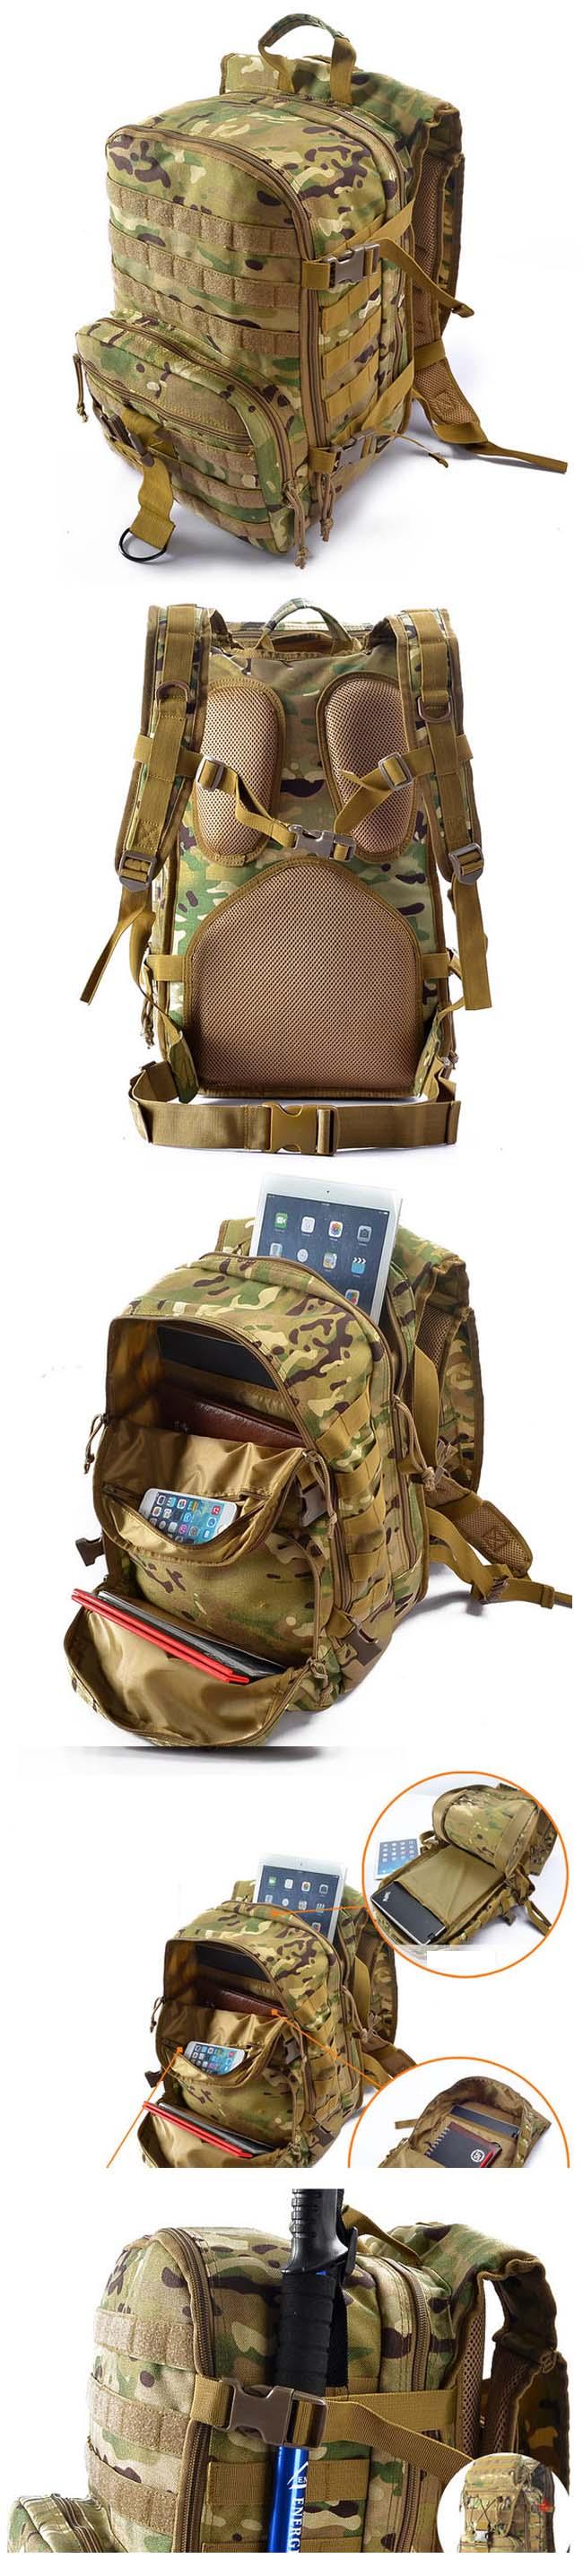 Folding Woman Small Army Backpack Camouflage Lightweight With Shoulders